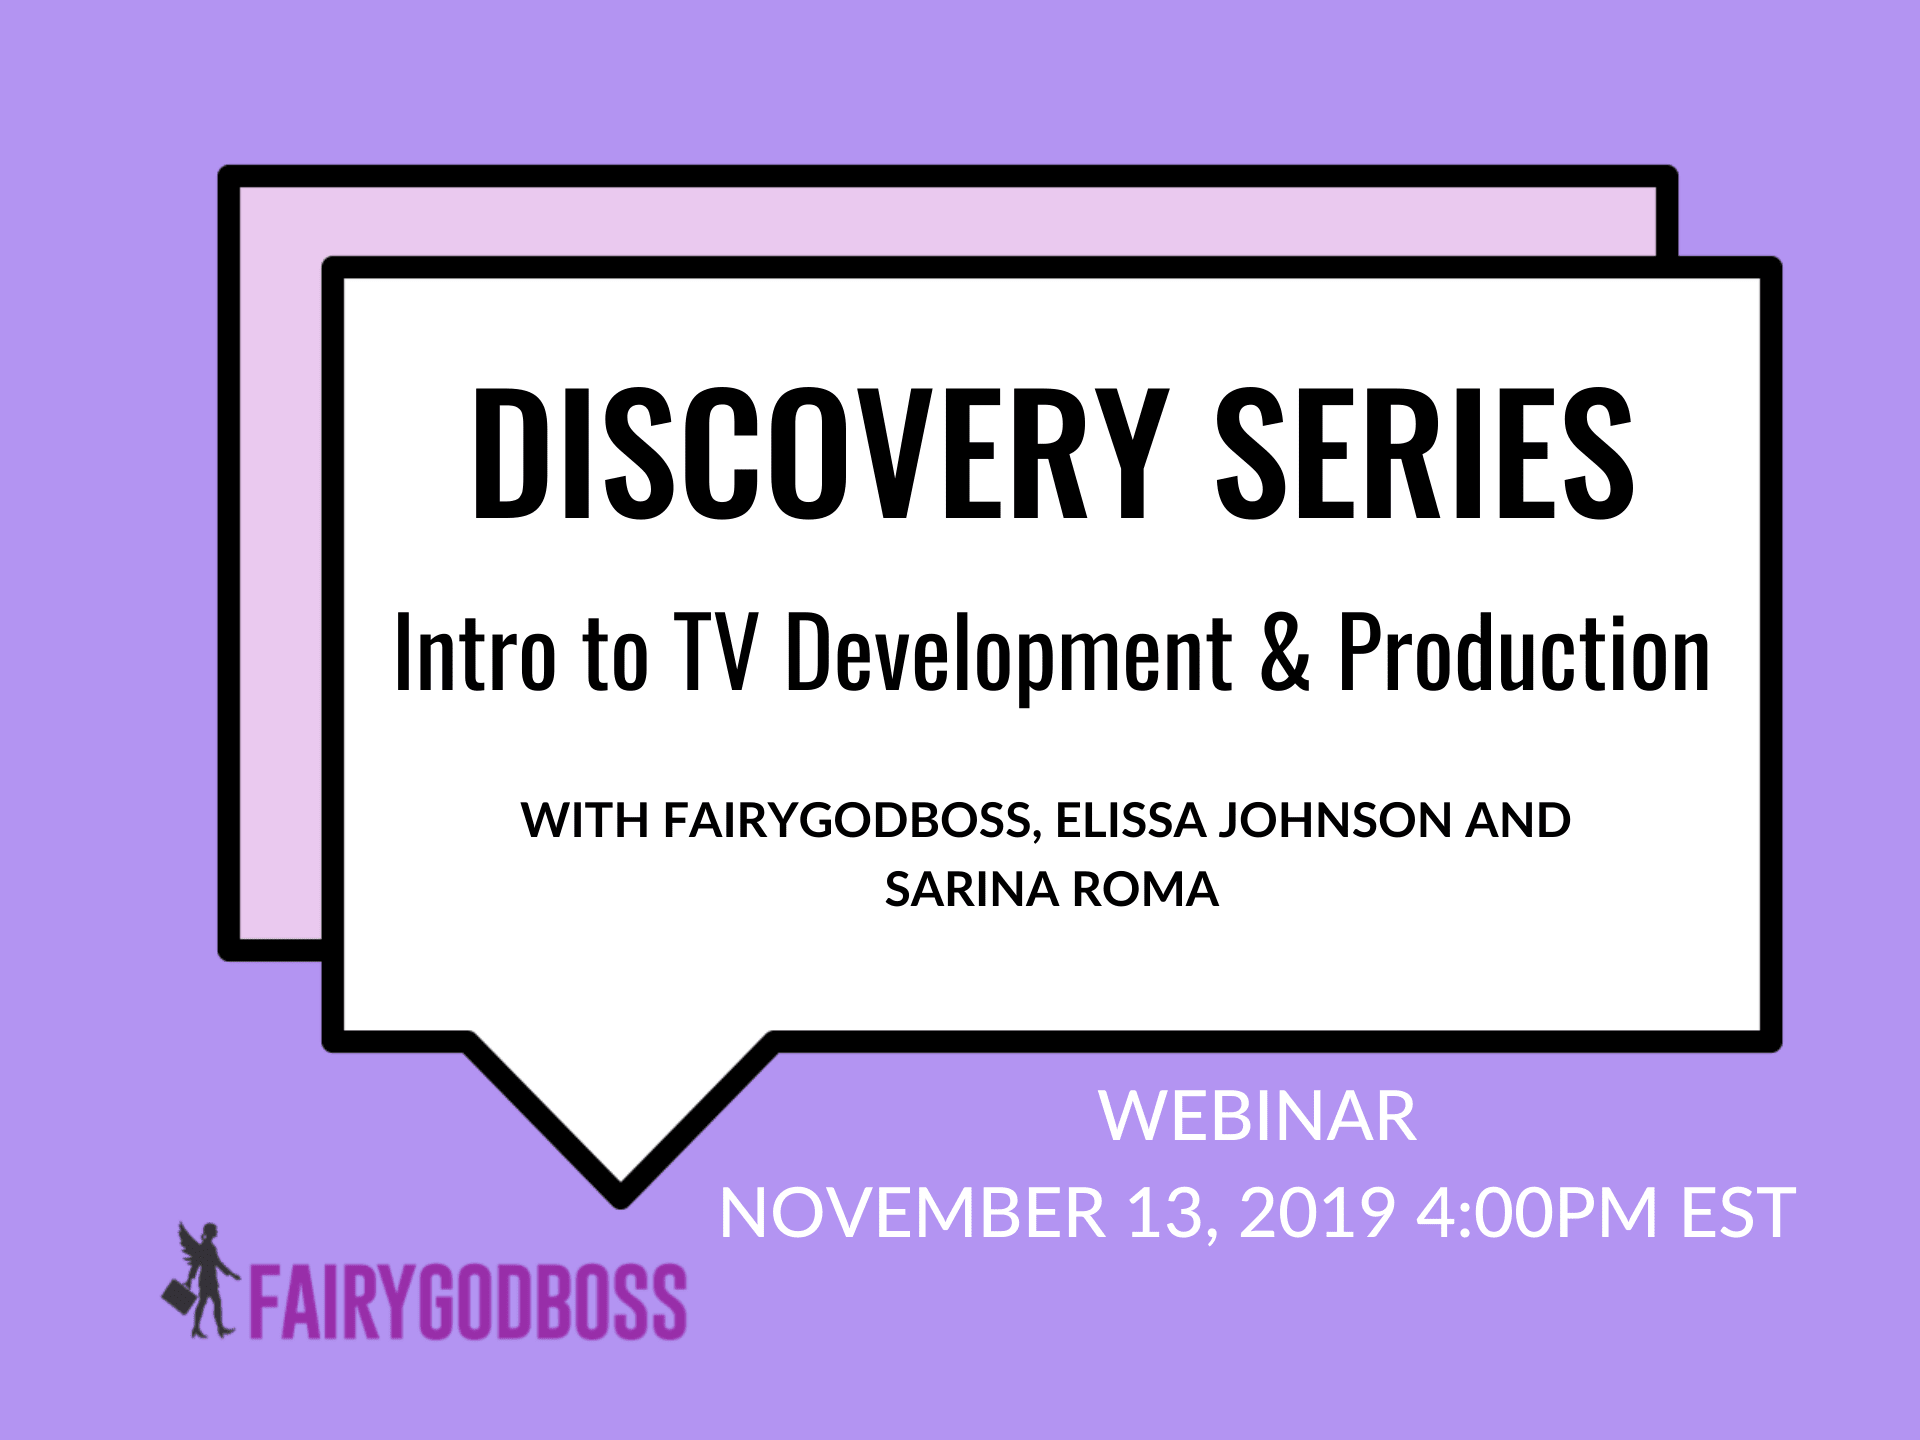 Discovery Series: Intro to TV Development & Production